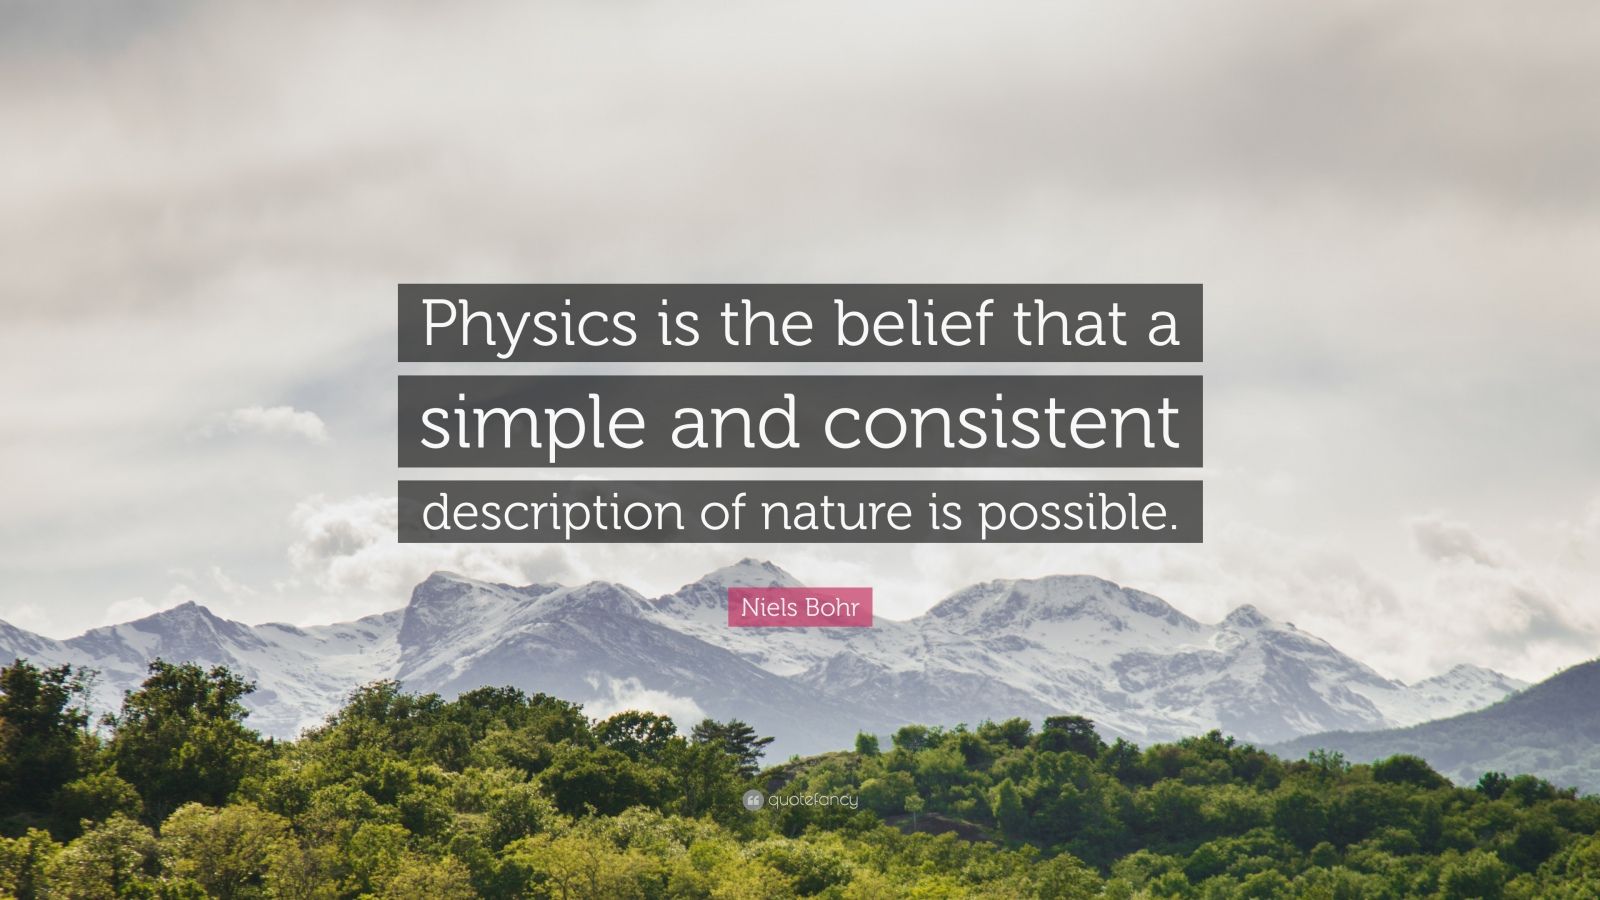 Niels Bohr quote 1080P 2k 4k HD wallpapers backgrounds free download   Rare Gallery